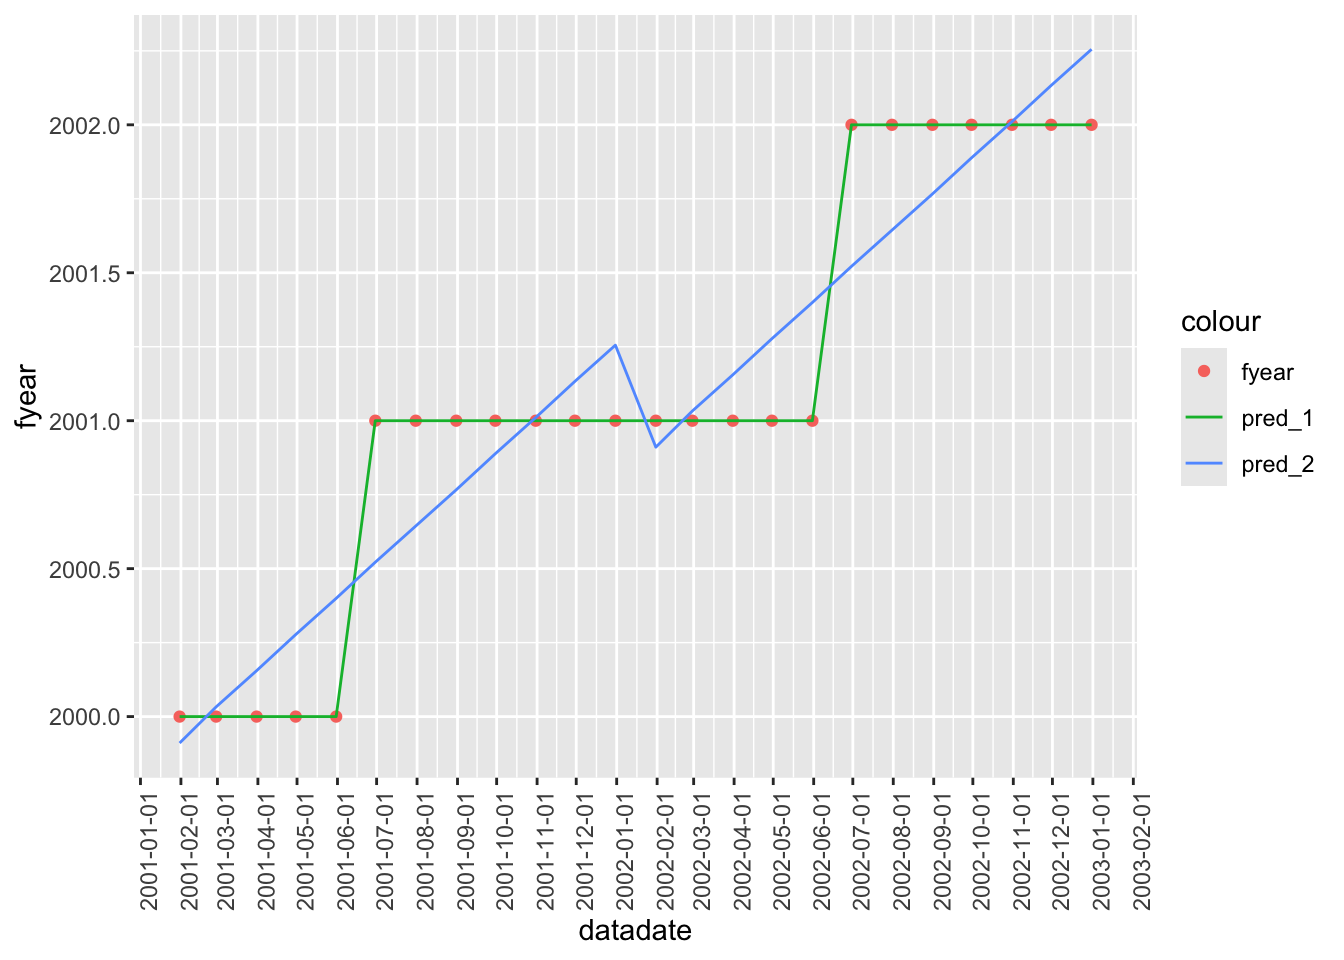 Plot of fyear against datadate. Plot shows scatterplot of actual data plus predicted values from two models. One model does a relatively poor job and the other model perfectly predicts fyear given datadate.